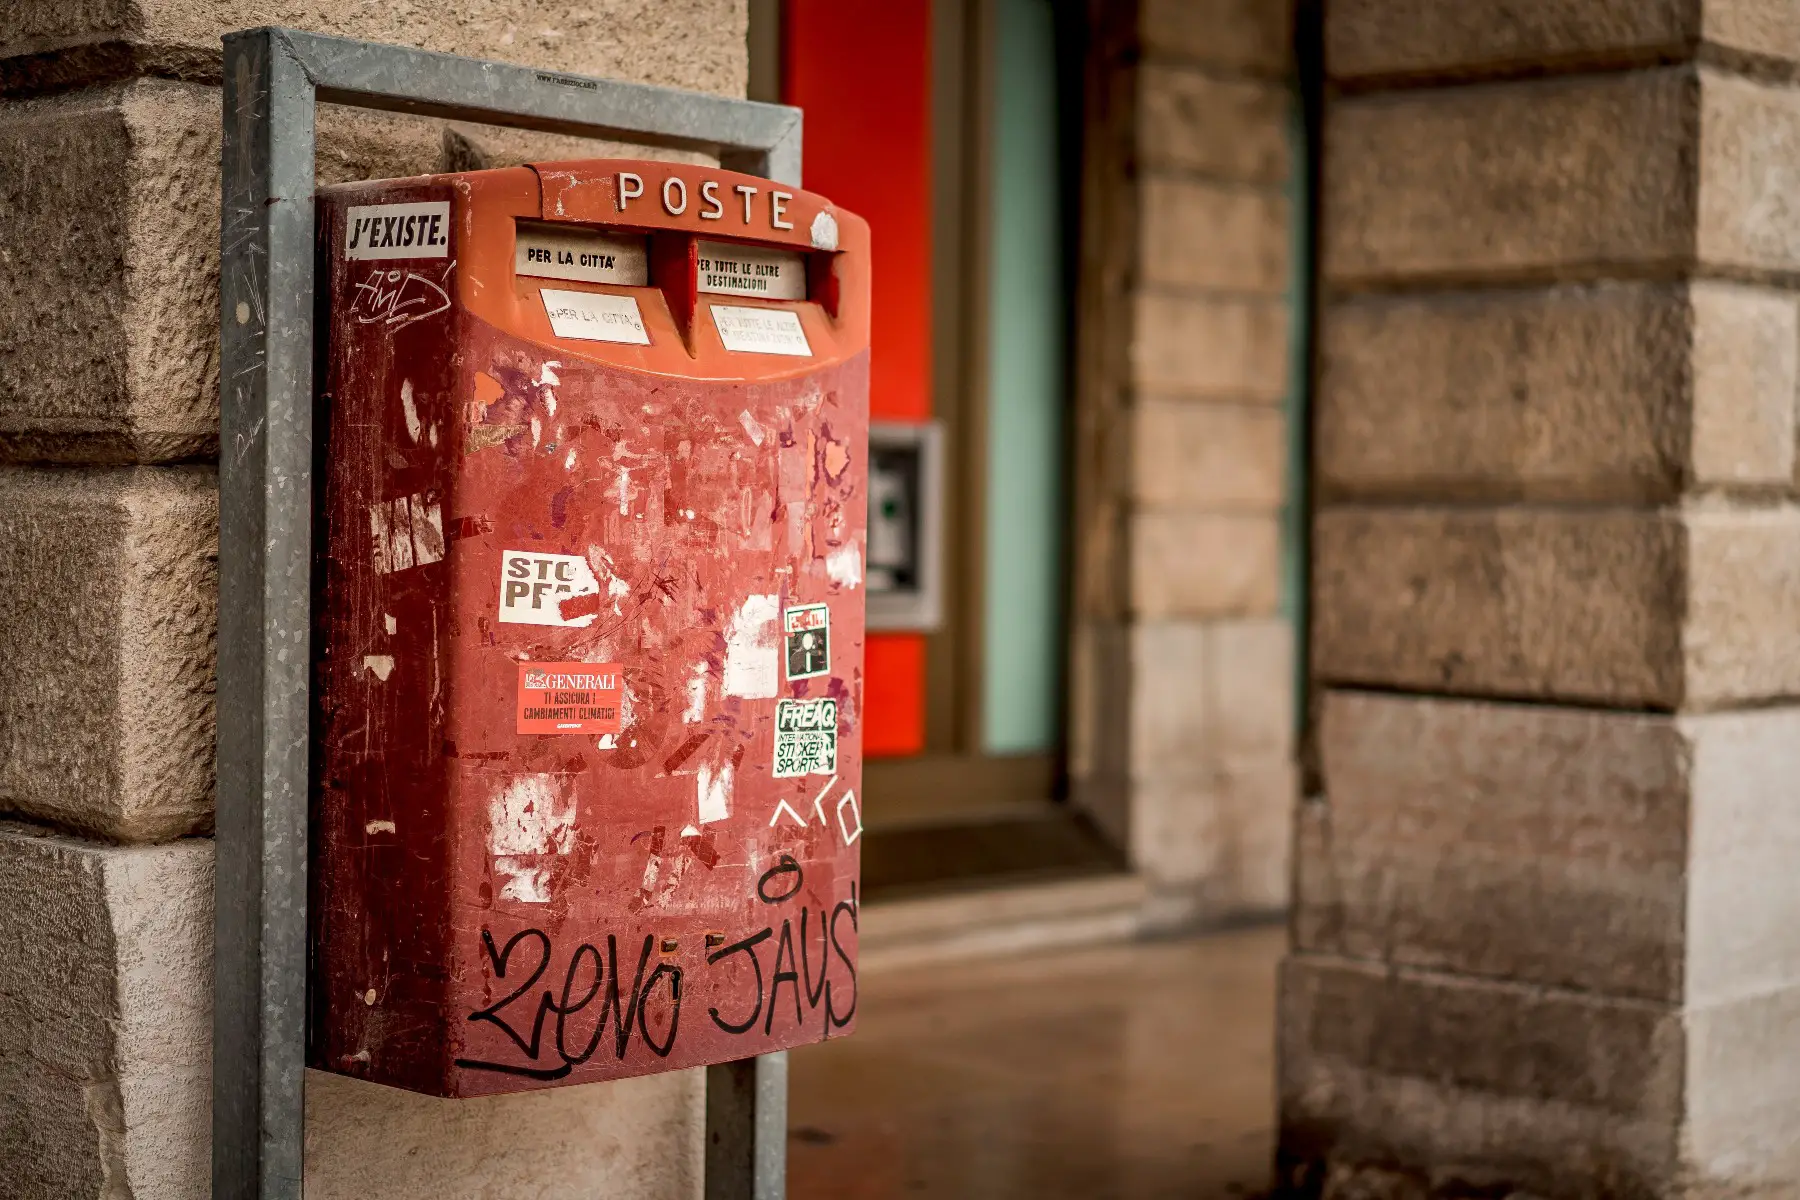 A close-up shot of a red mail box mounted on a brick wall in Verona, Italy